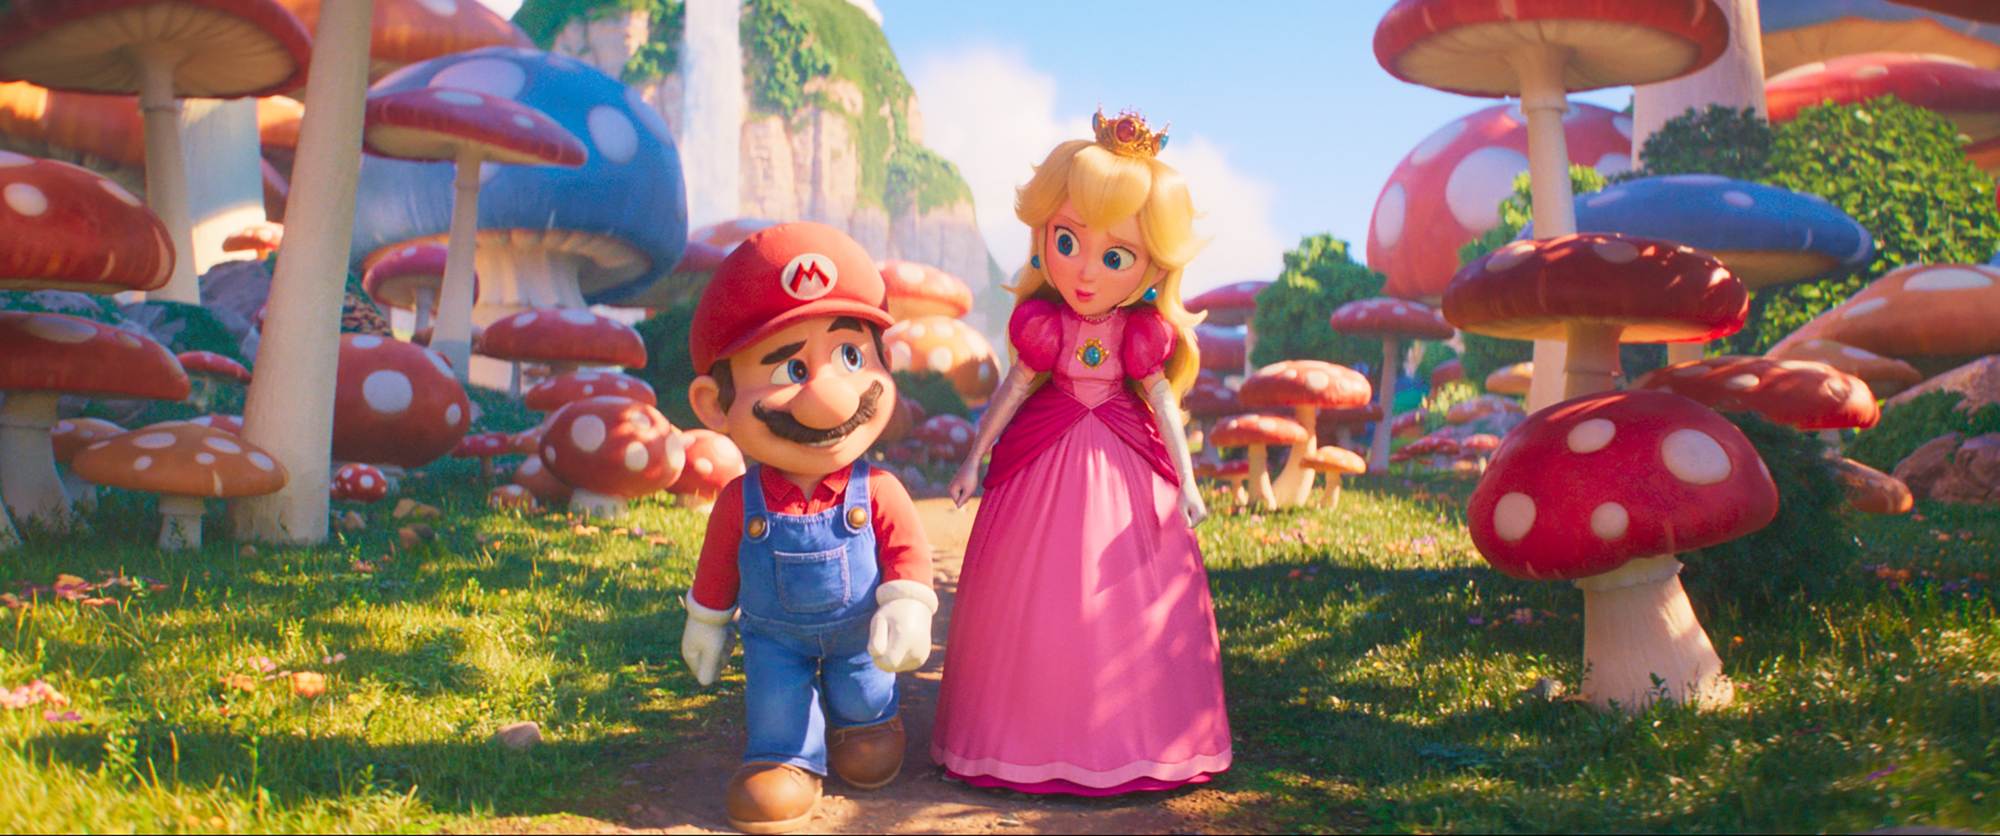 'The Super Mario Bros. Movie' Mario (voiced by Chris Pratt) and Princess Peach (voiced by Anya Taylor-Joy) walking on a path surrounded by grass and large mushrooms, as they look at one another.